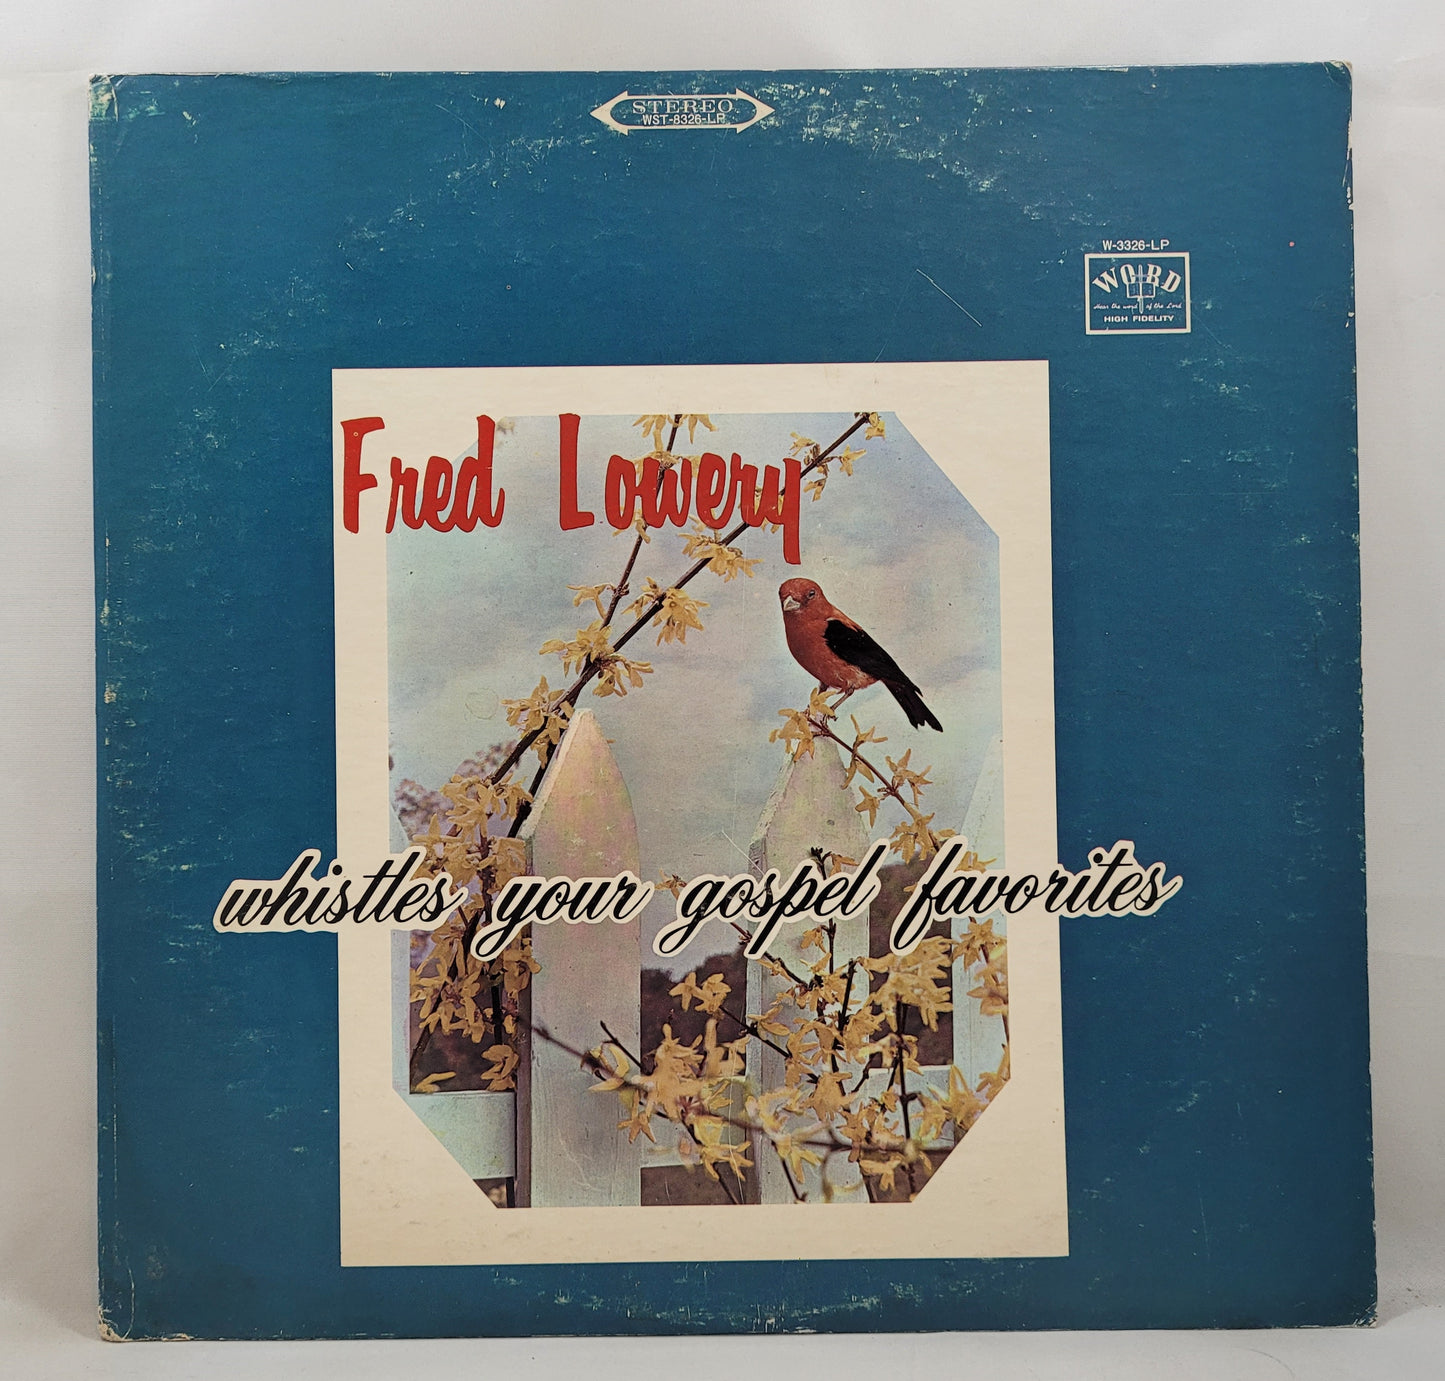 Fred Lowery - Fred Lowery Whistles Your Gospel Favorites [1967 Used Vinyl LP]